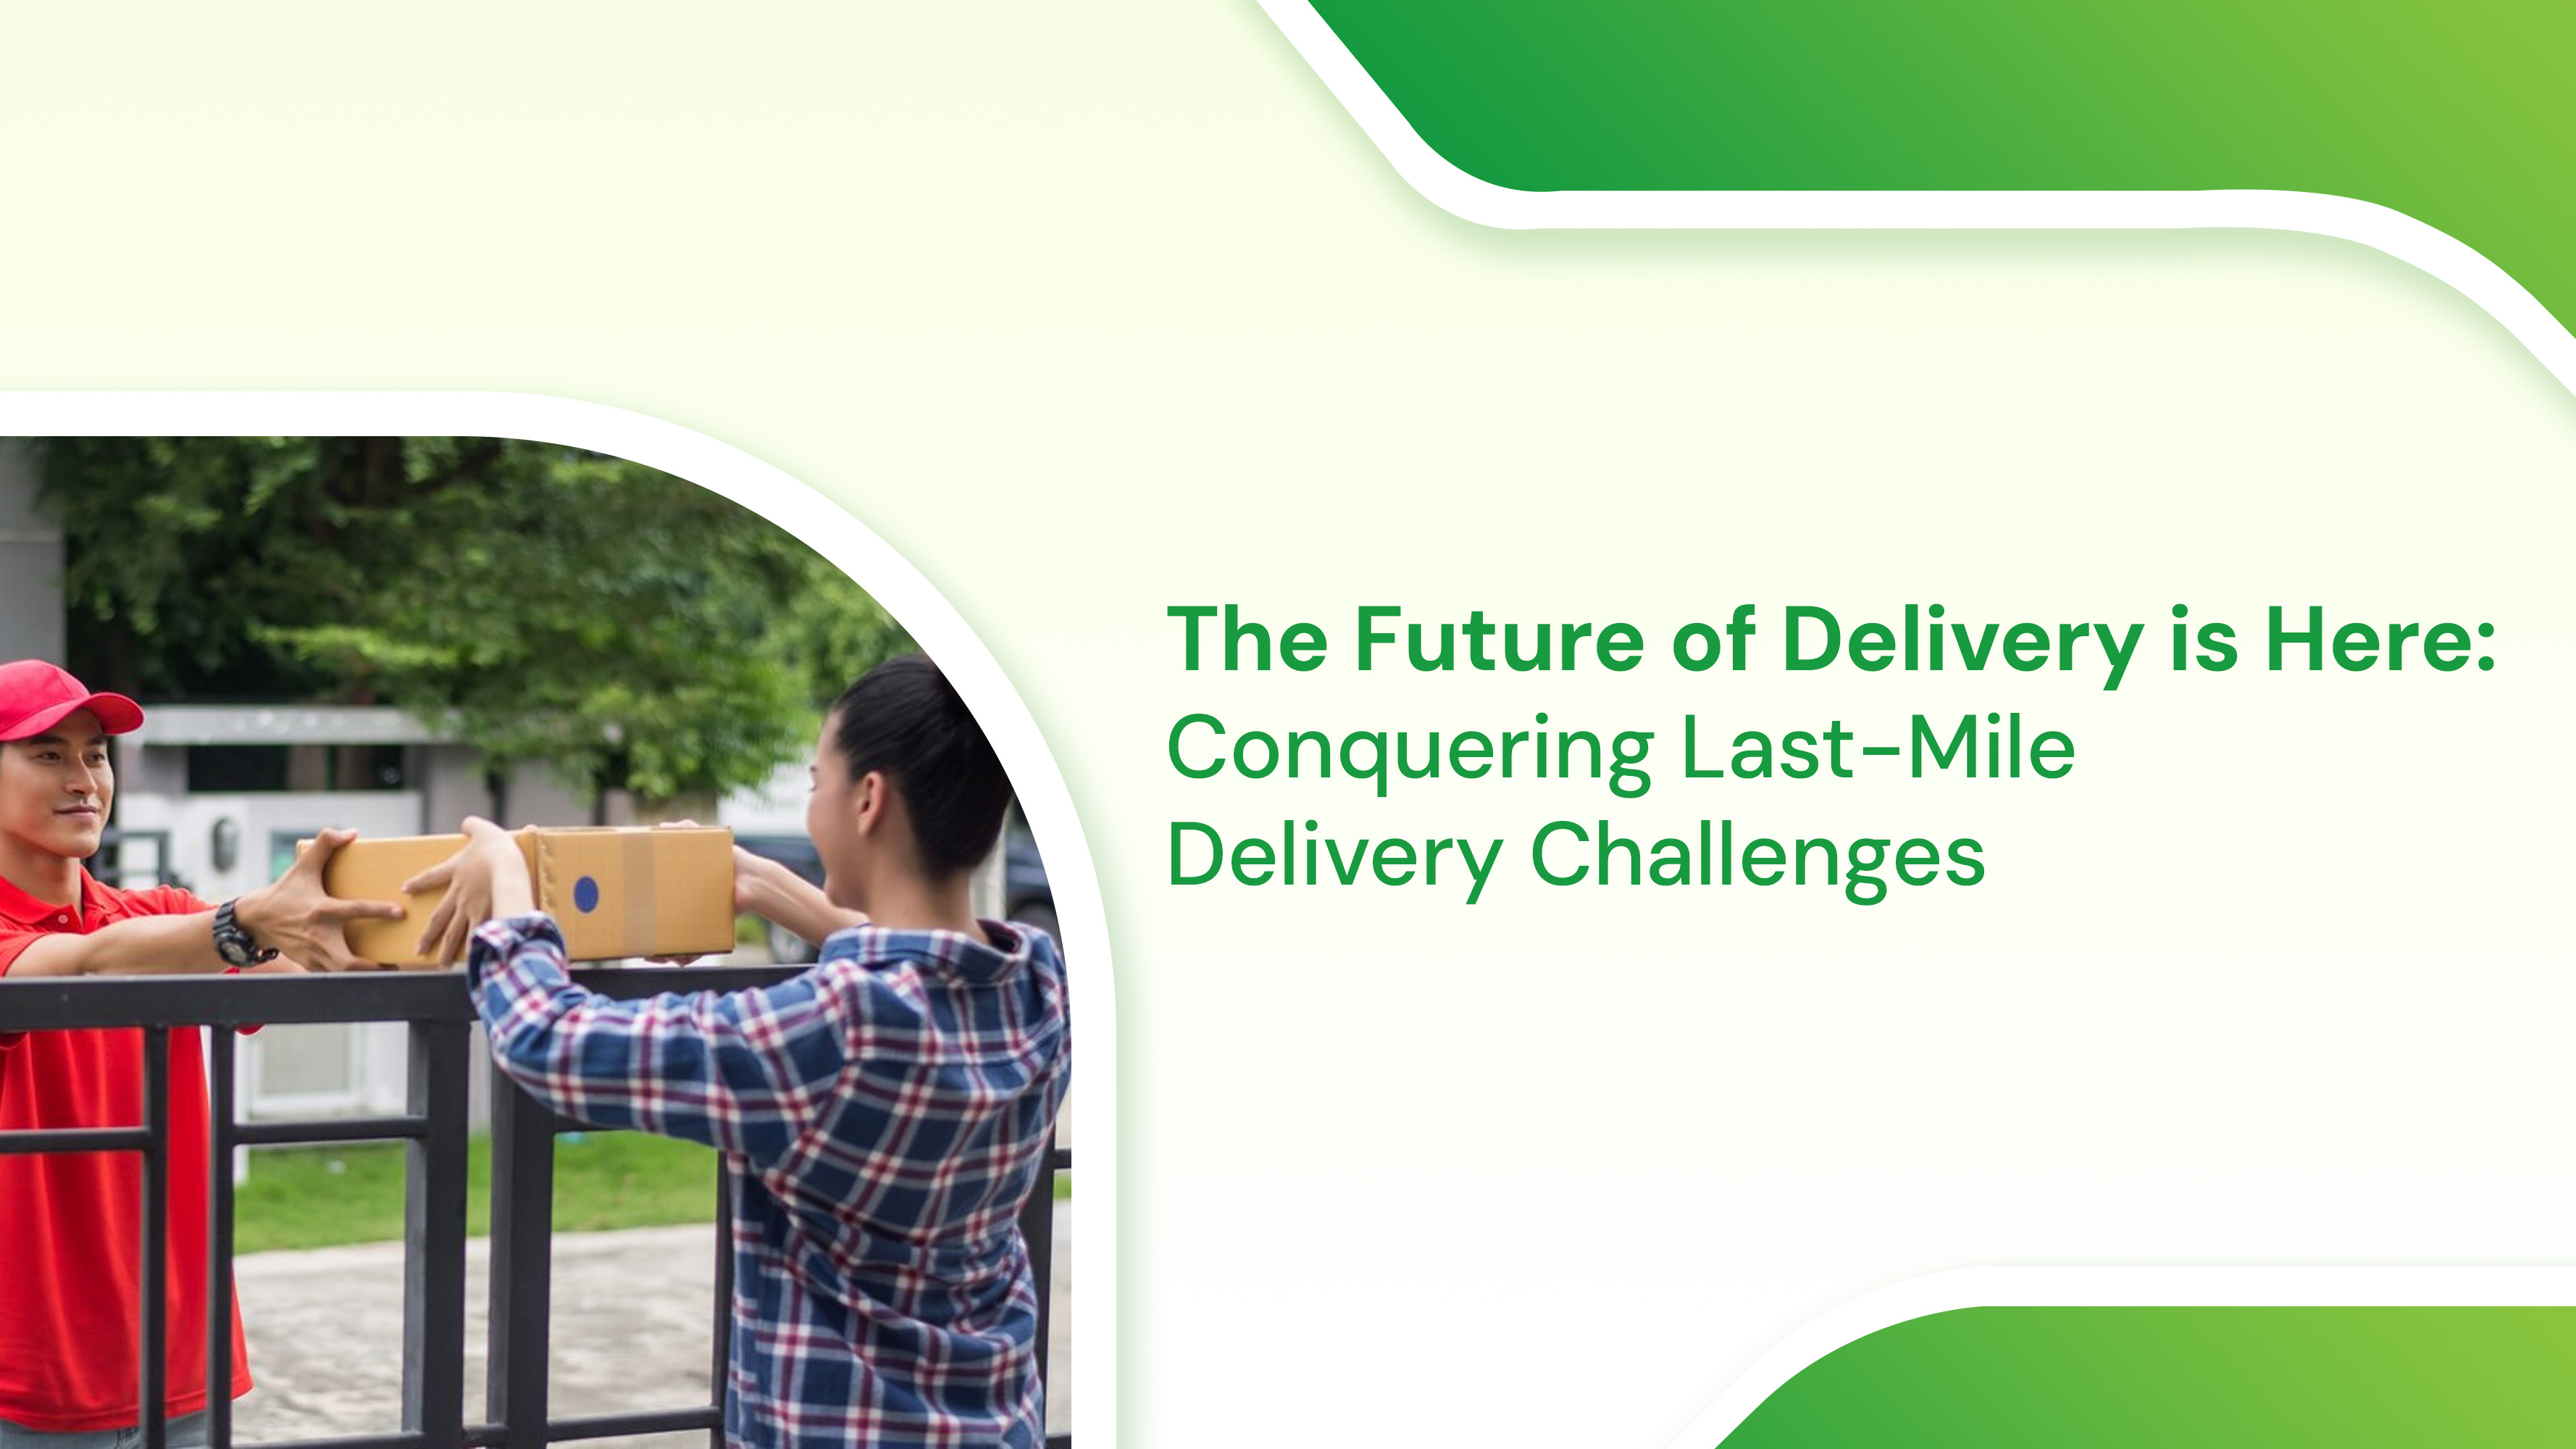 The Future of Delivery is Here: Conquering Last-Mile Delivery Challenges